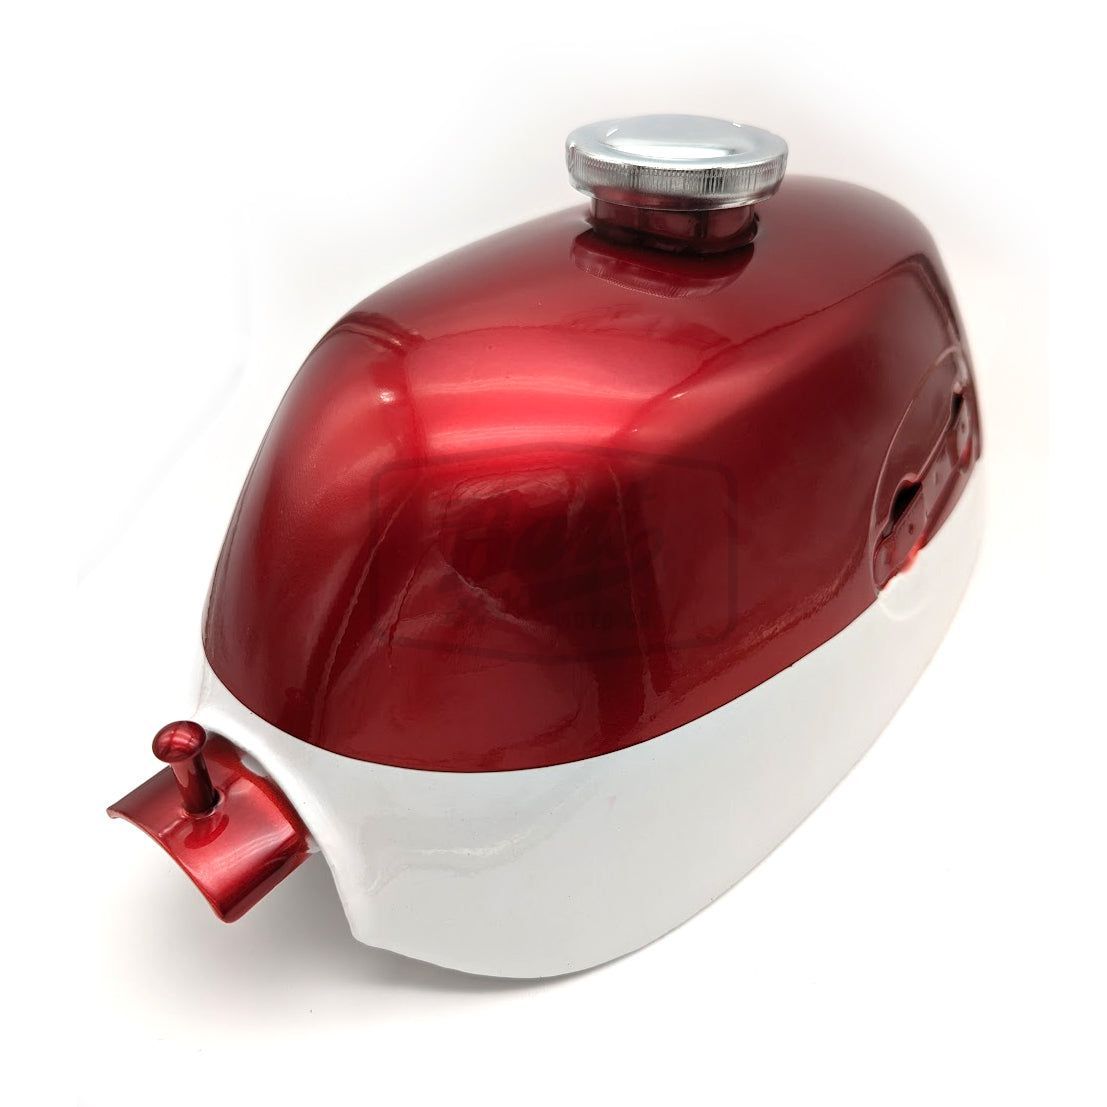 Reproduction Z50 K2 1971 Gas Fuel Tank Full Kit (Ruby Red)